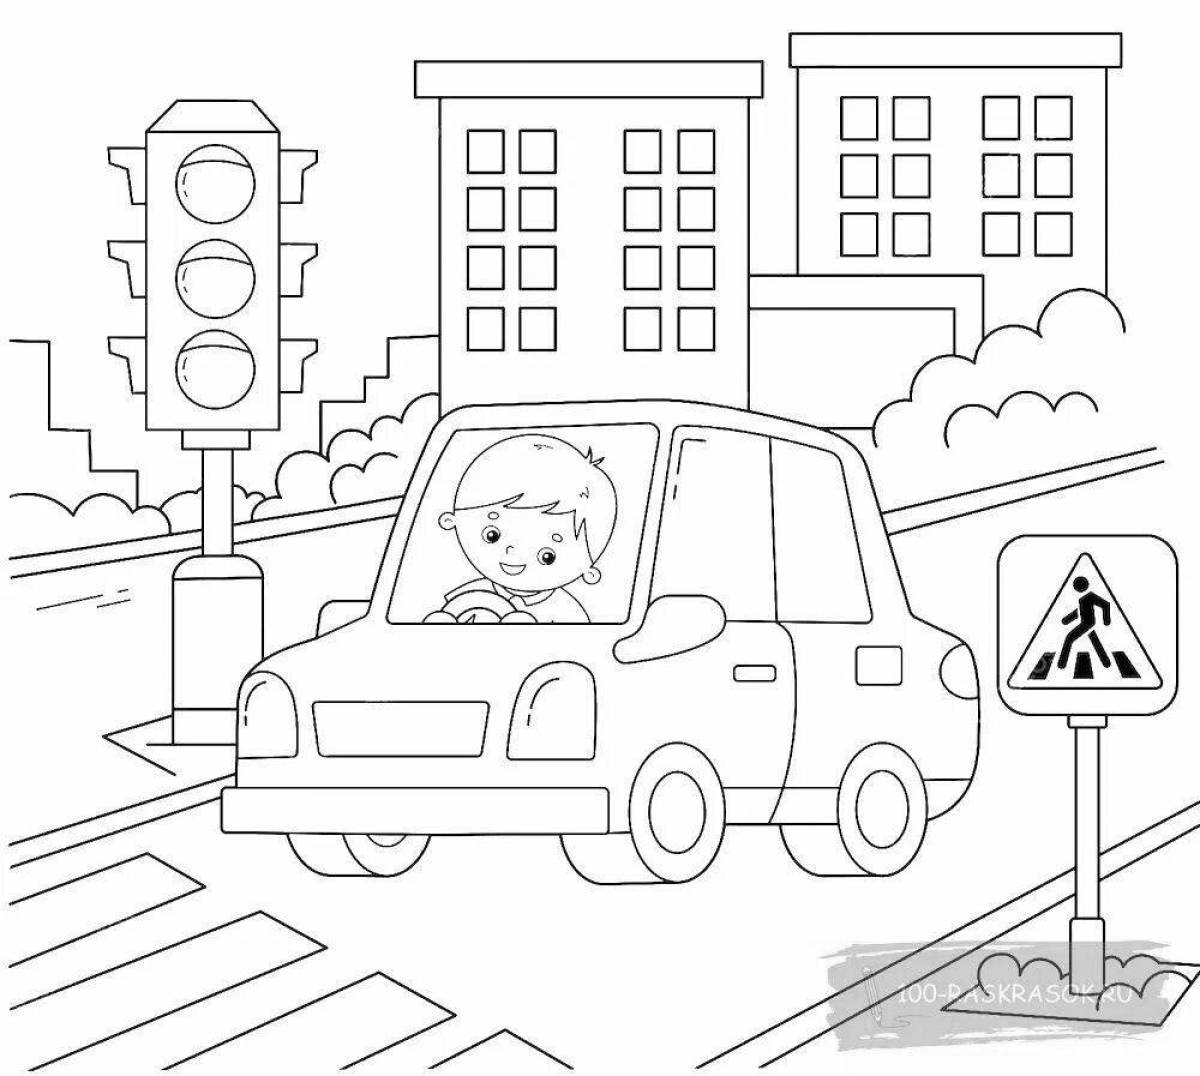 Playful traffic light coloring page for 2-3 year olds